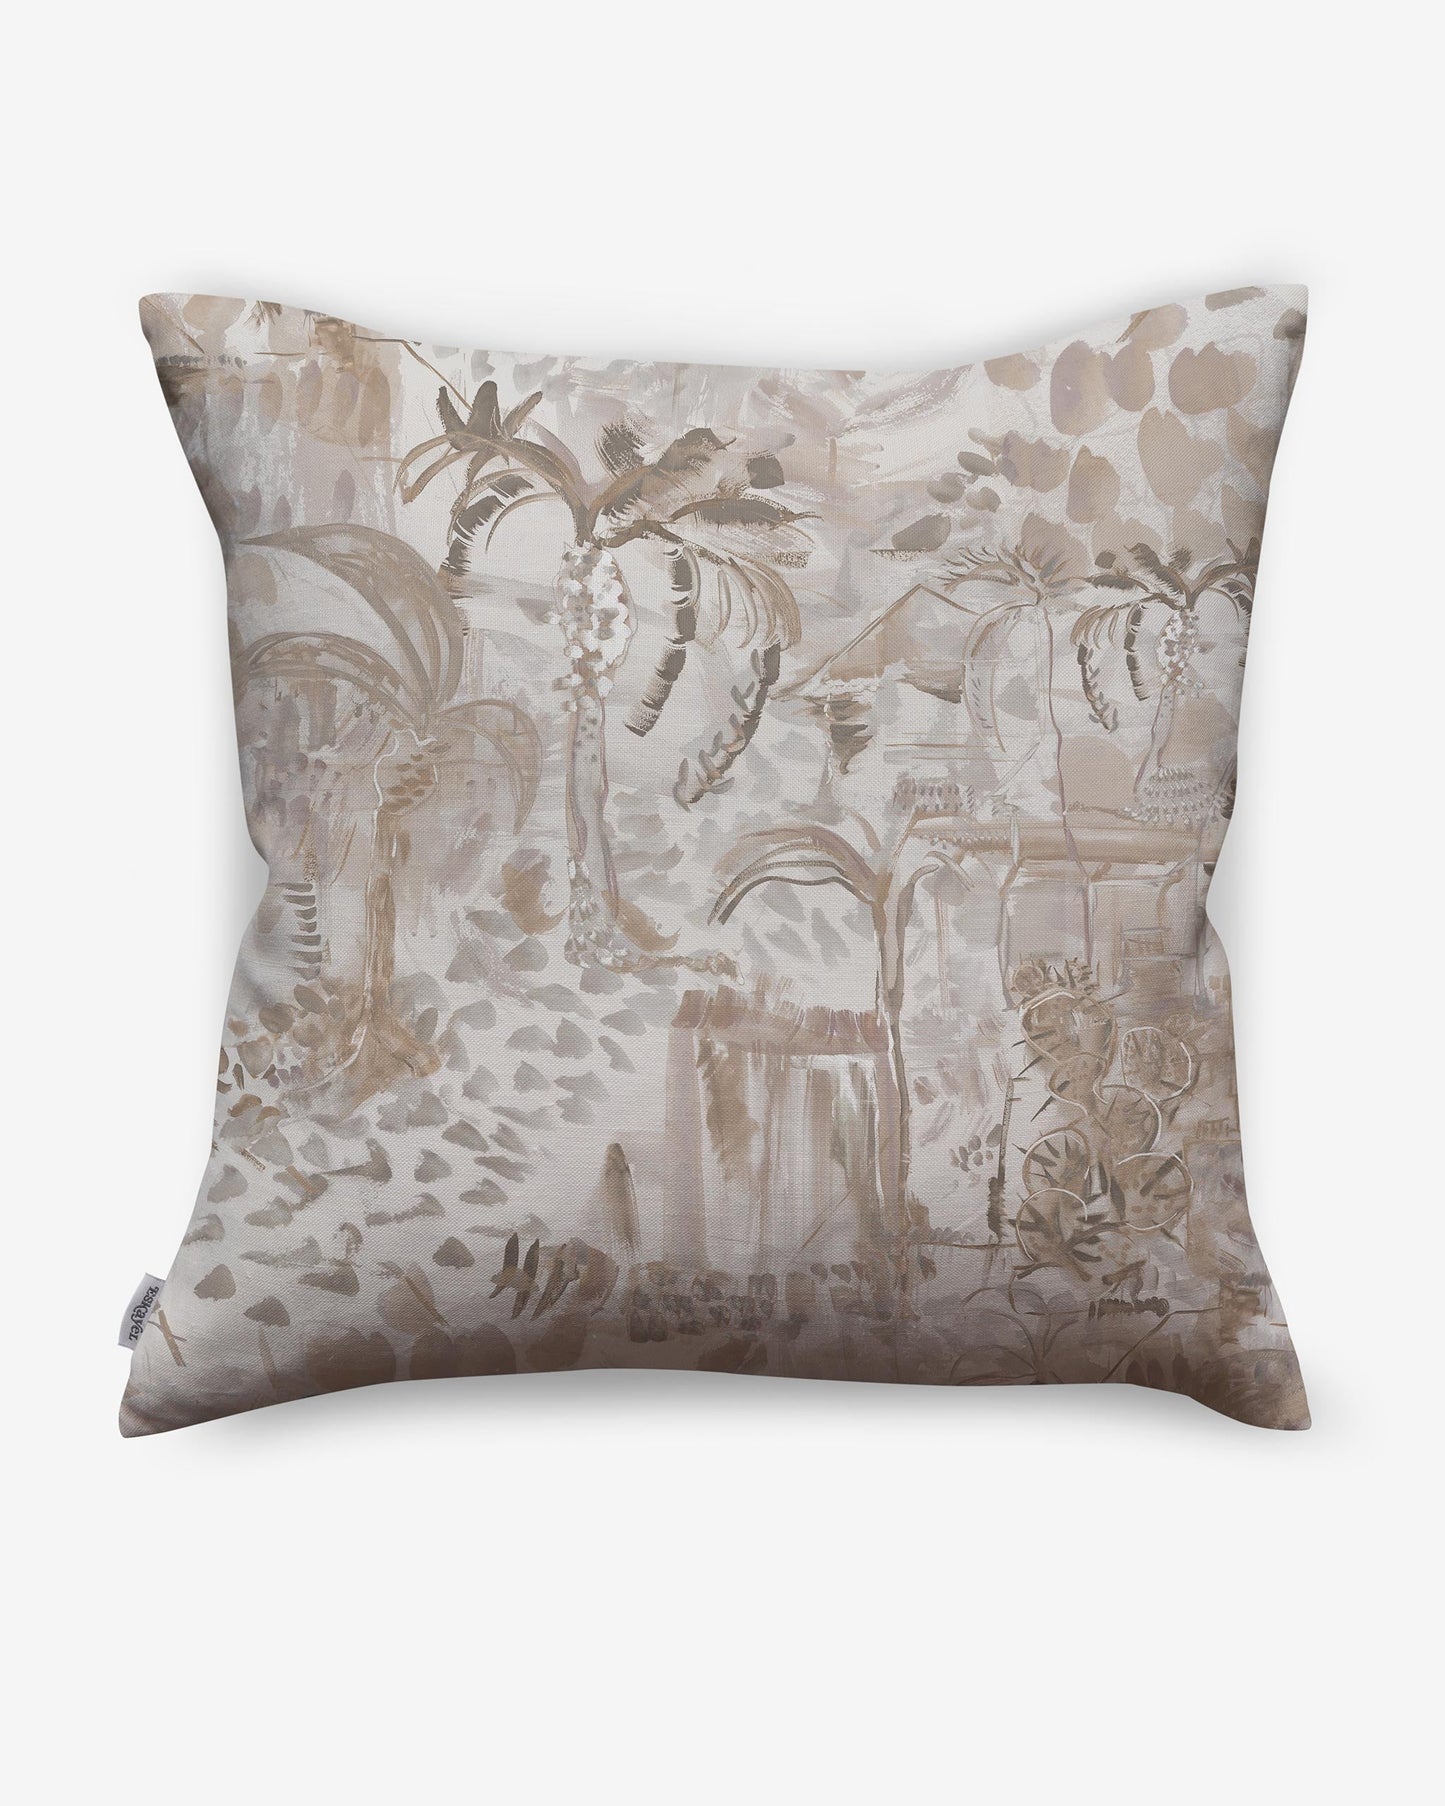 A beige and brown Souk Pillow, perfect for a custom Souk-themed decor inspired by Marrakech